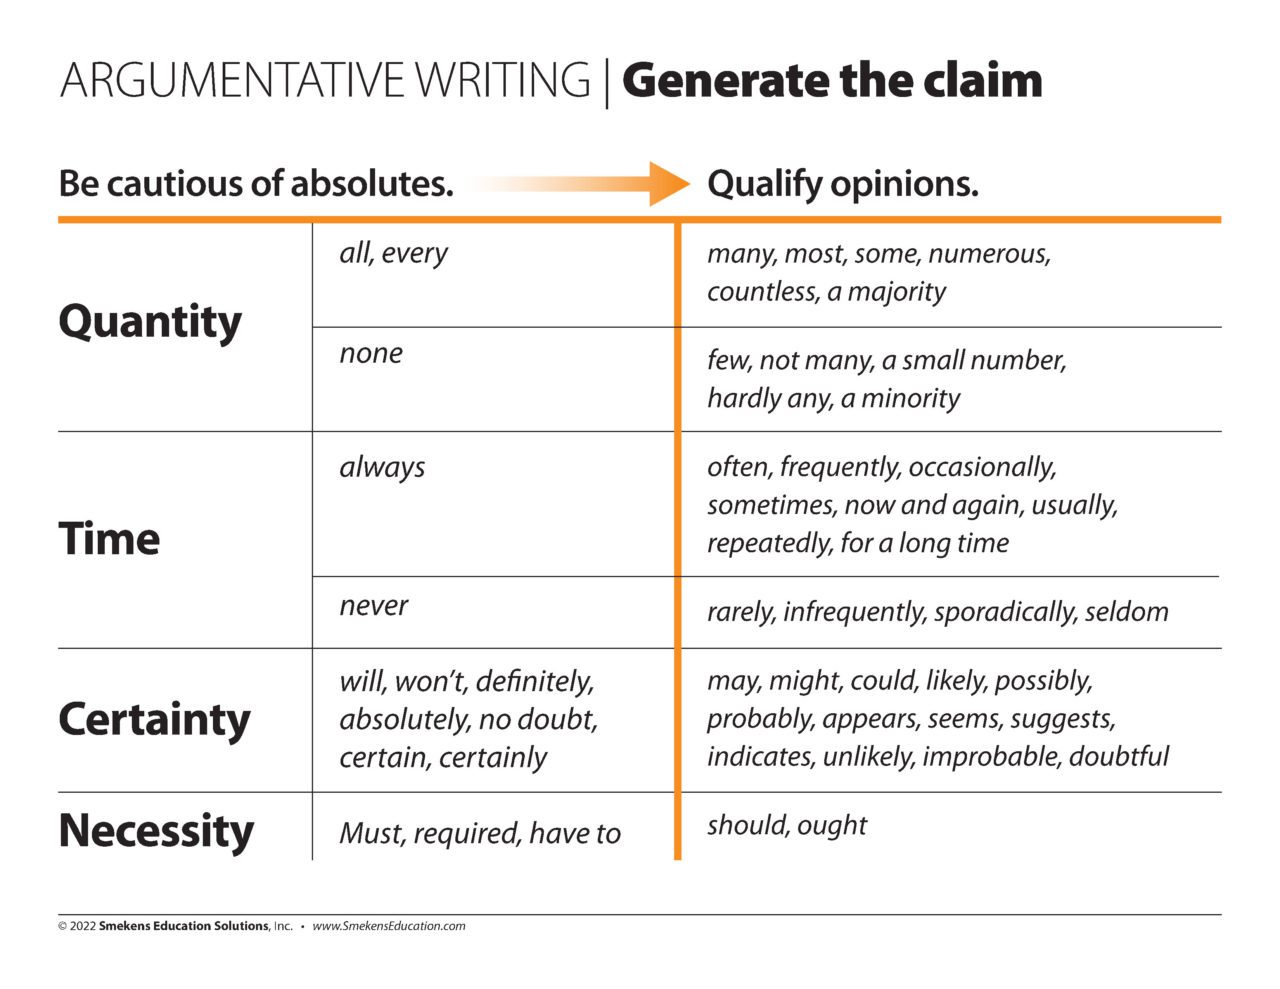 Argumentative Writing - Absolutes vs Opinions - Generate the claim